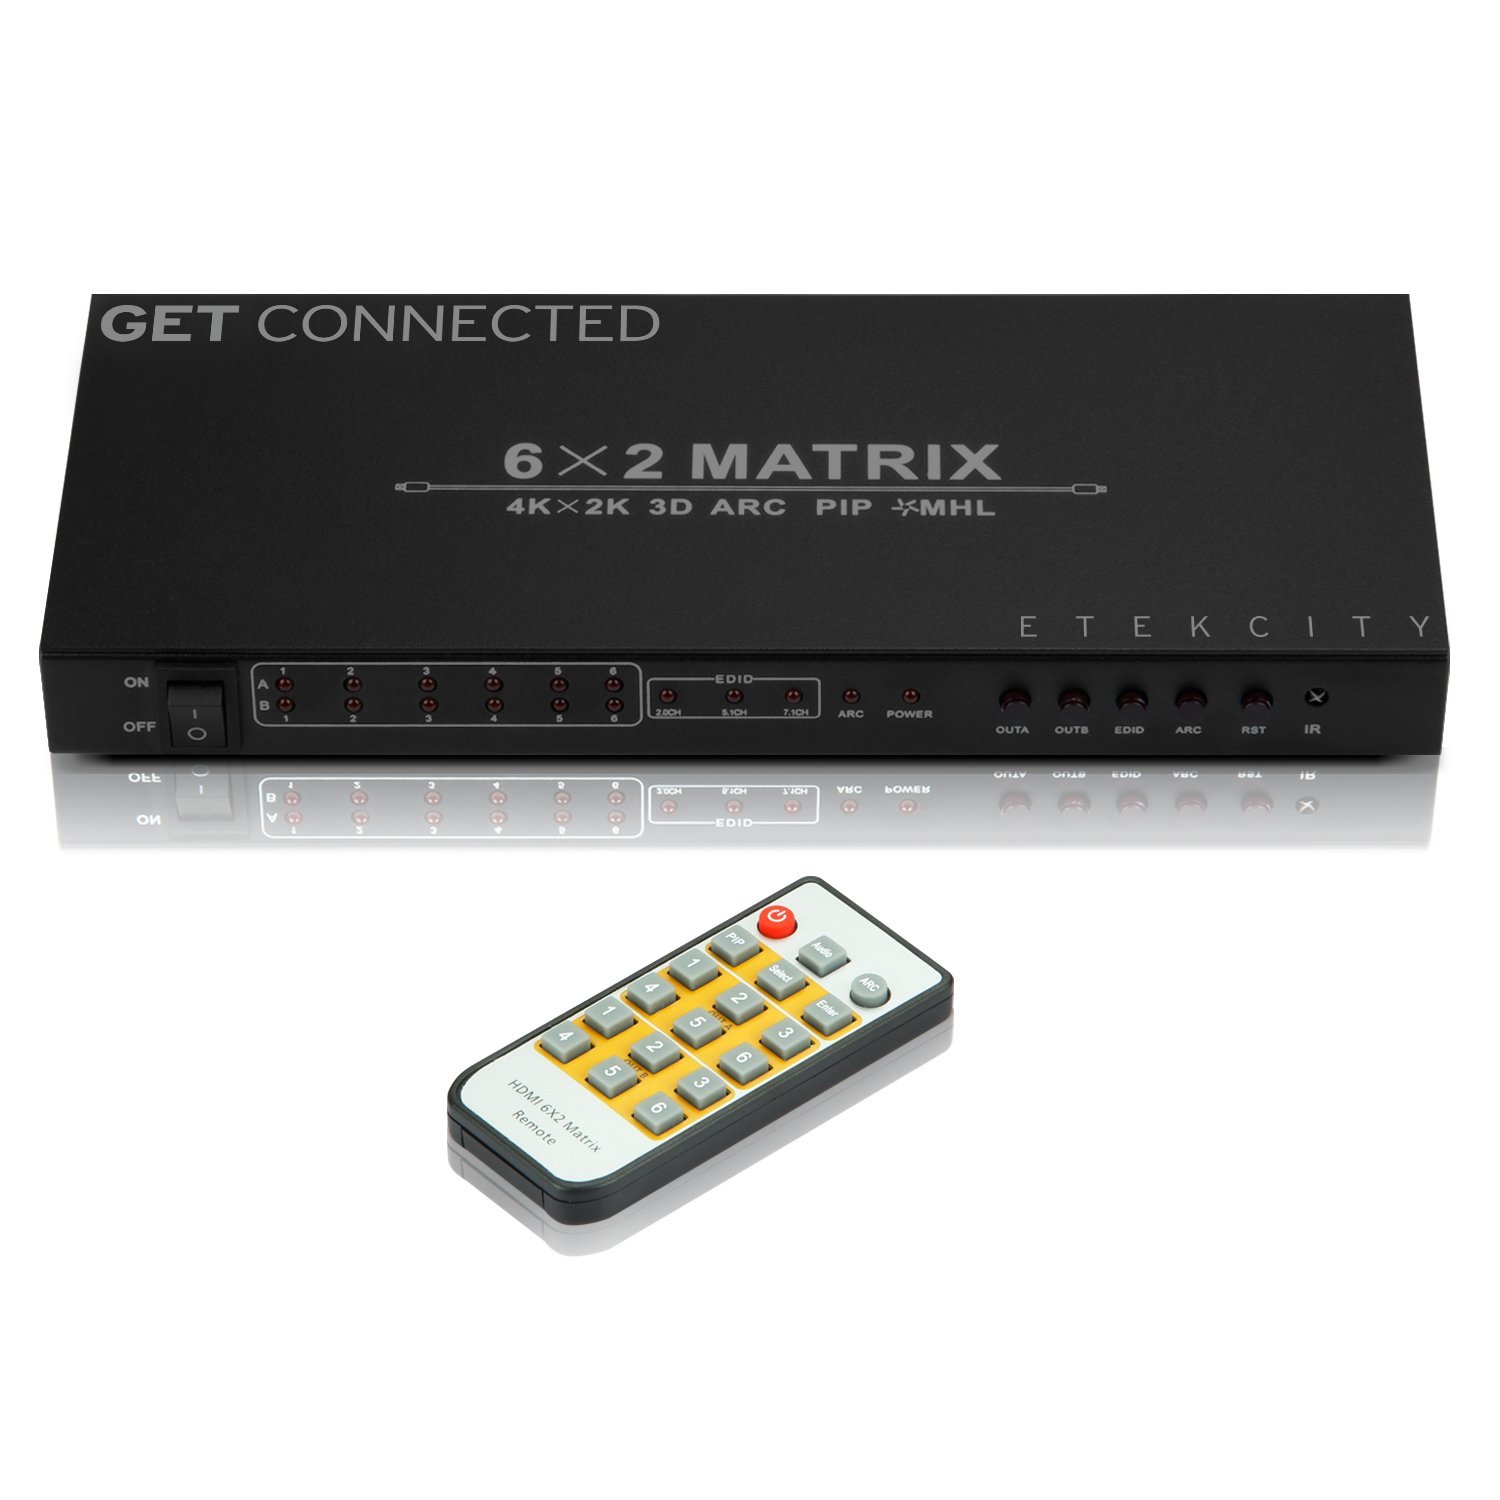 Etekcity (6 in 2 out) 6x2 HDMI Matrix Switcher & Splitter with IR Remote Control, Features PIP, ARC, MHL, HDMI 1.4, 3D and 4K x 2K(QFHD)